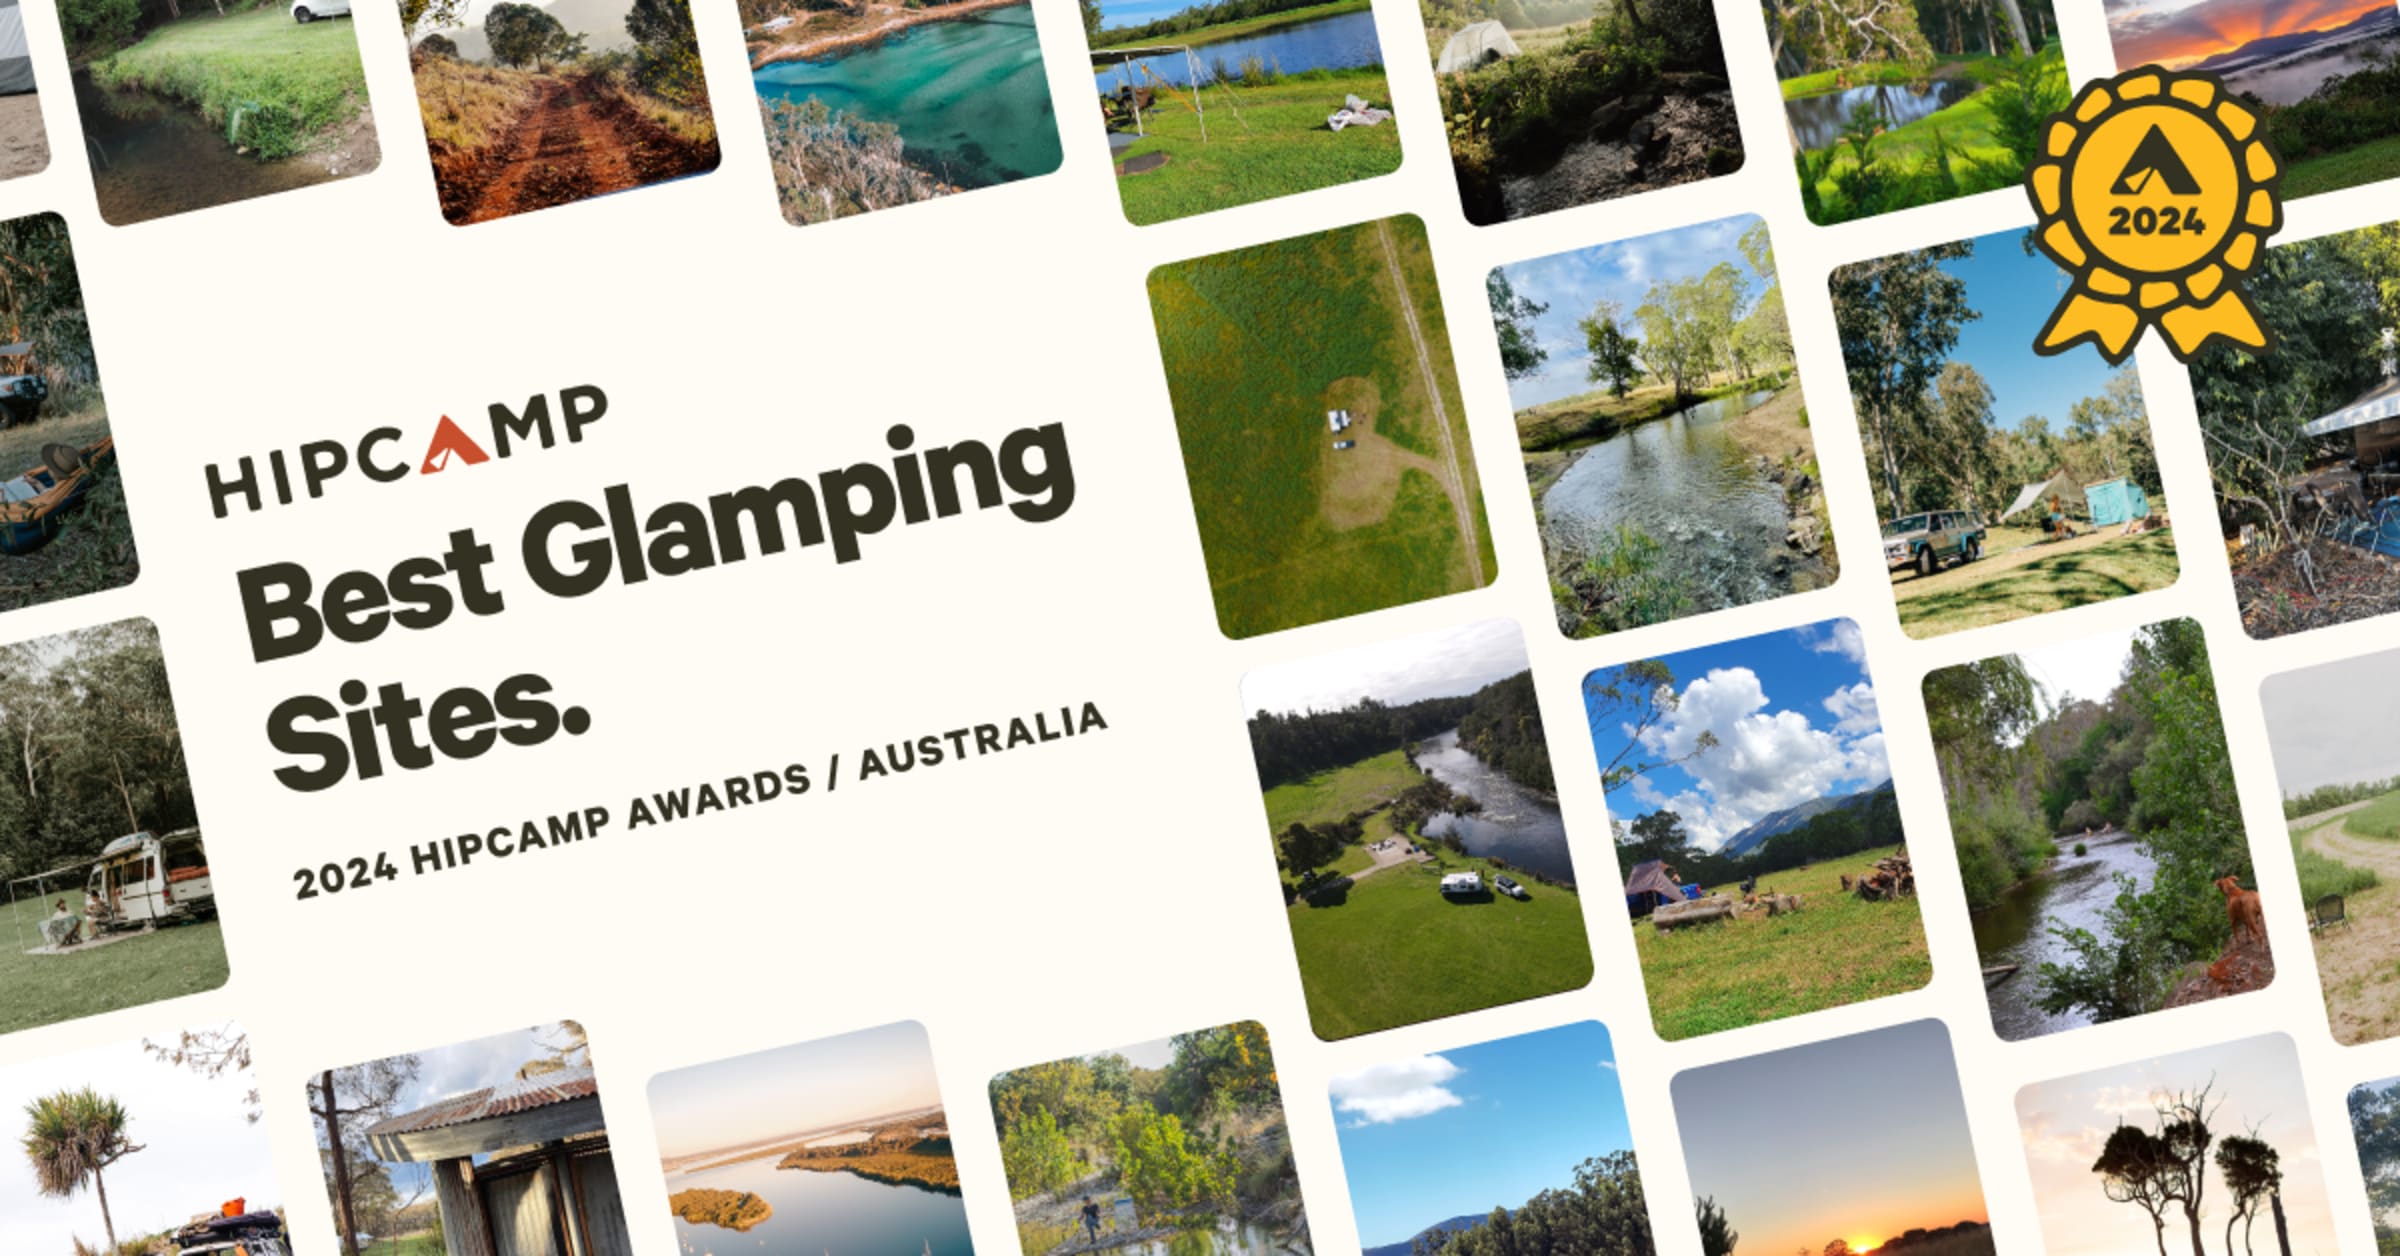 Hipcamp Awards 2024: Best Glamping Sites in Australia